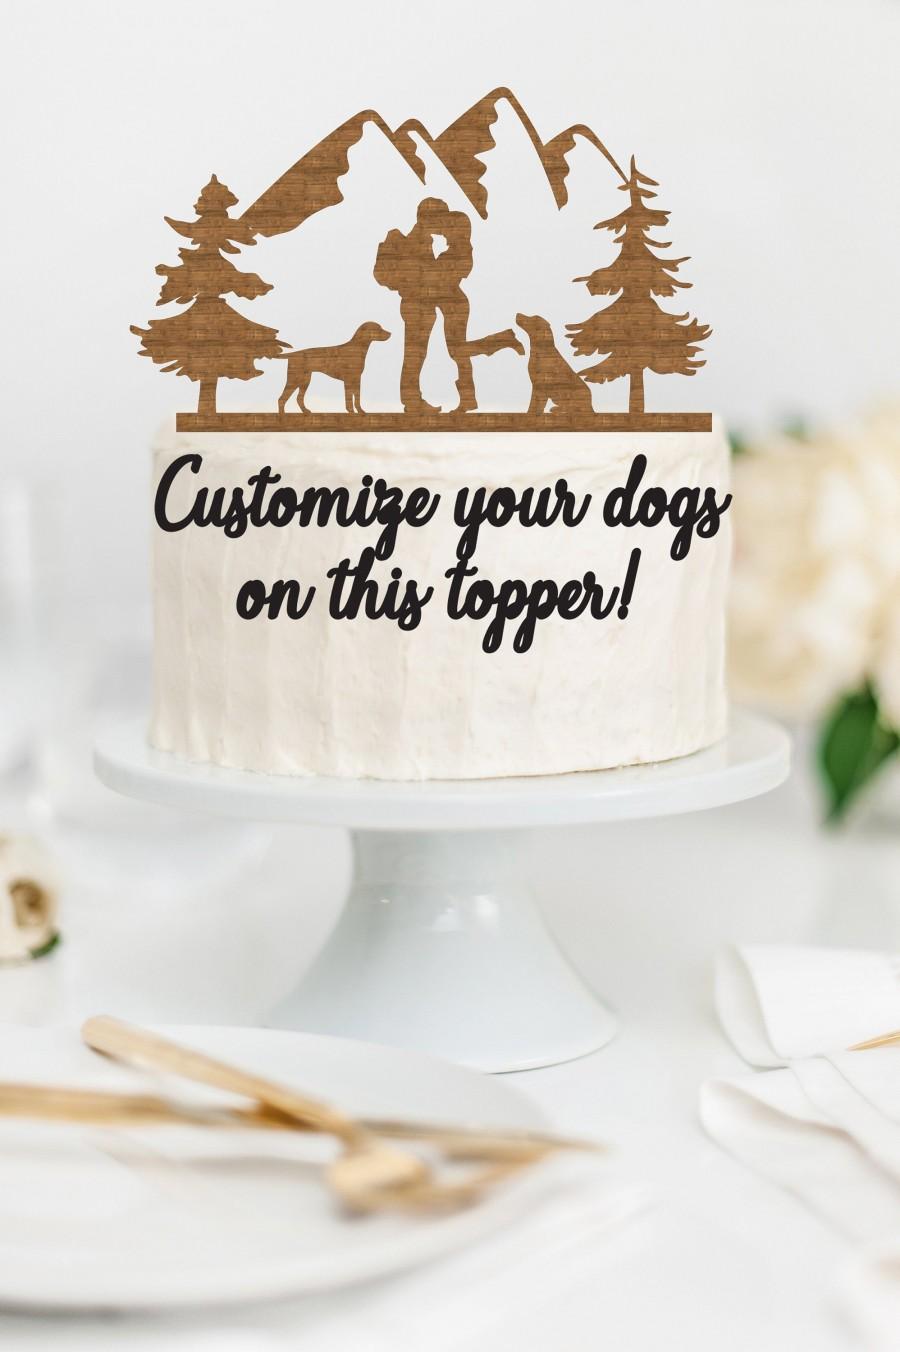 Wedding - HIKING COUPLE with CUSTOMIZABLE Dogs Wood Wedding Cake Topper / Backpacking outdoor bride groom cake topper / camping cake topper